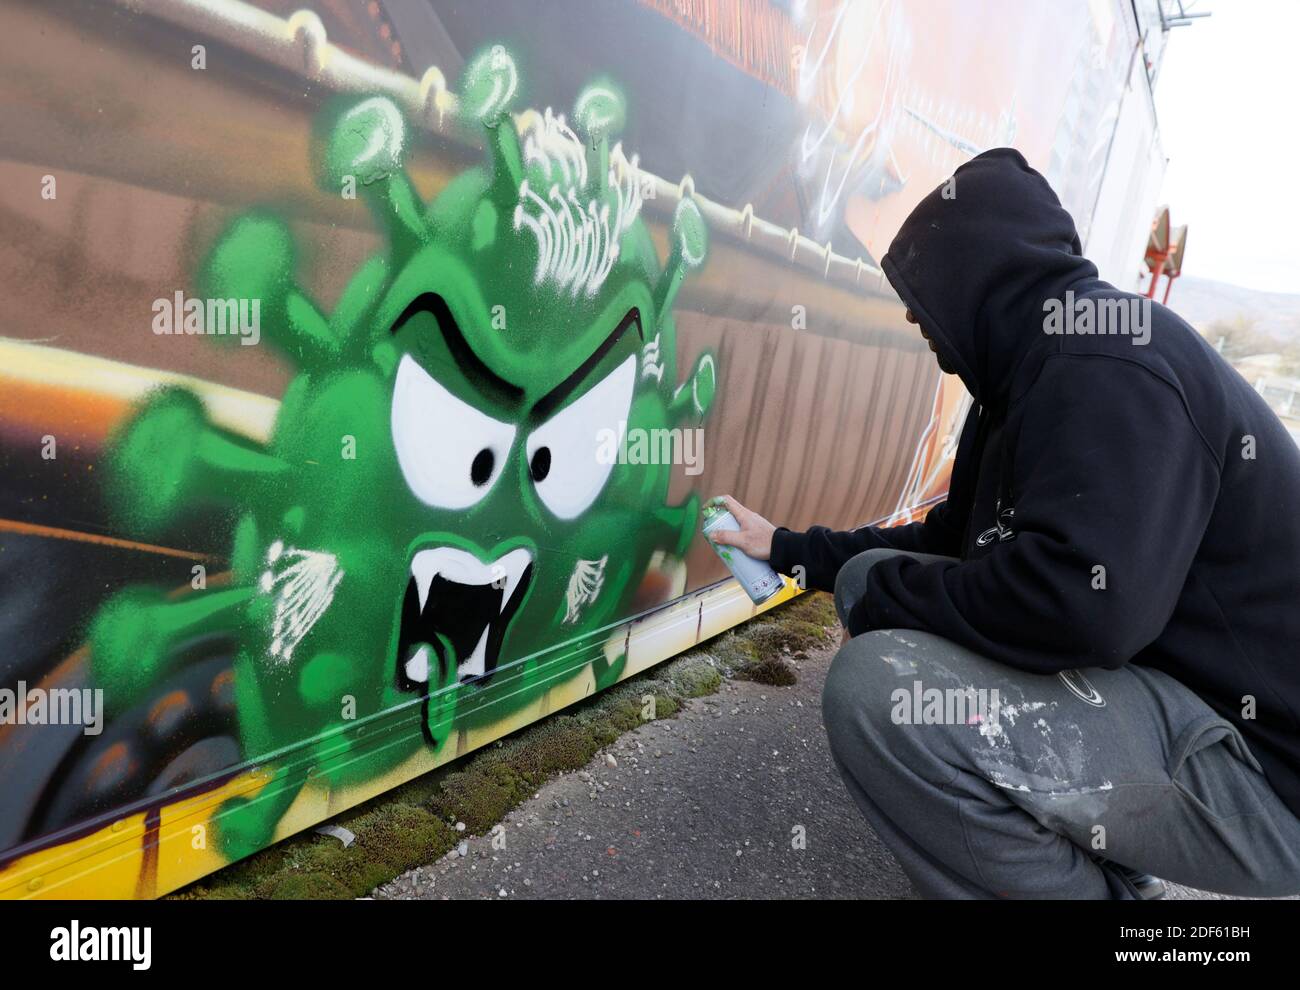 Artist David "S.I.D." Perez paints a graffiti, representing two vaccines  (Modernos 19 and Pizter Klorokinos) fighting against a virus in the  background of a popular video game Street Fighter, during the coronavirus